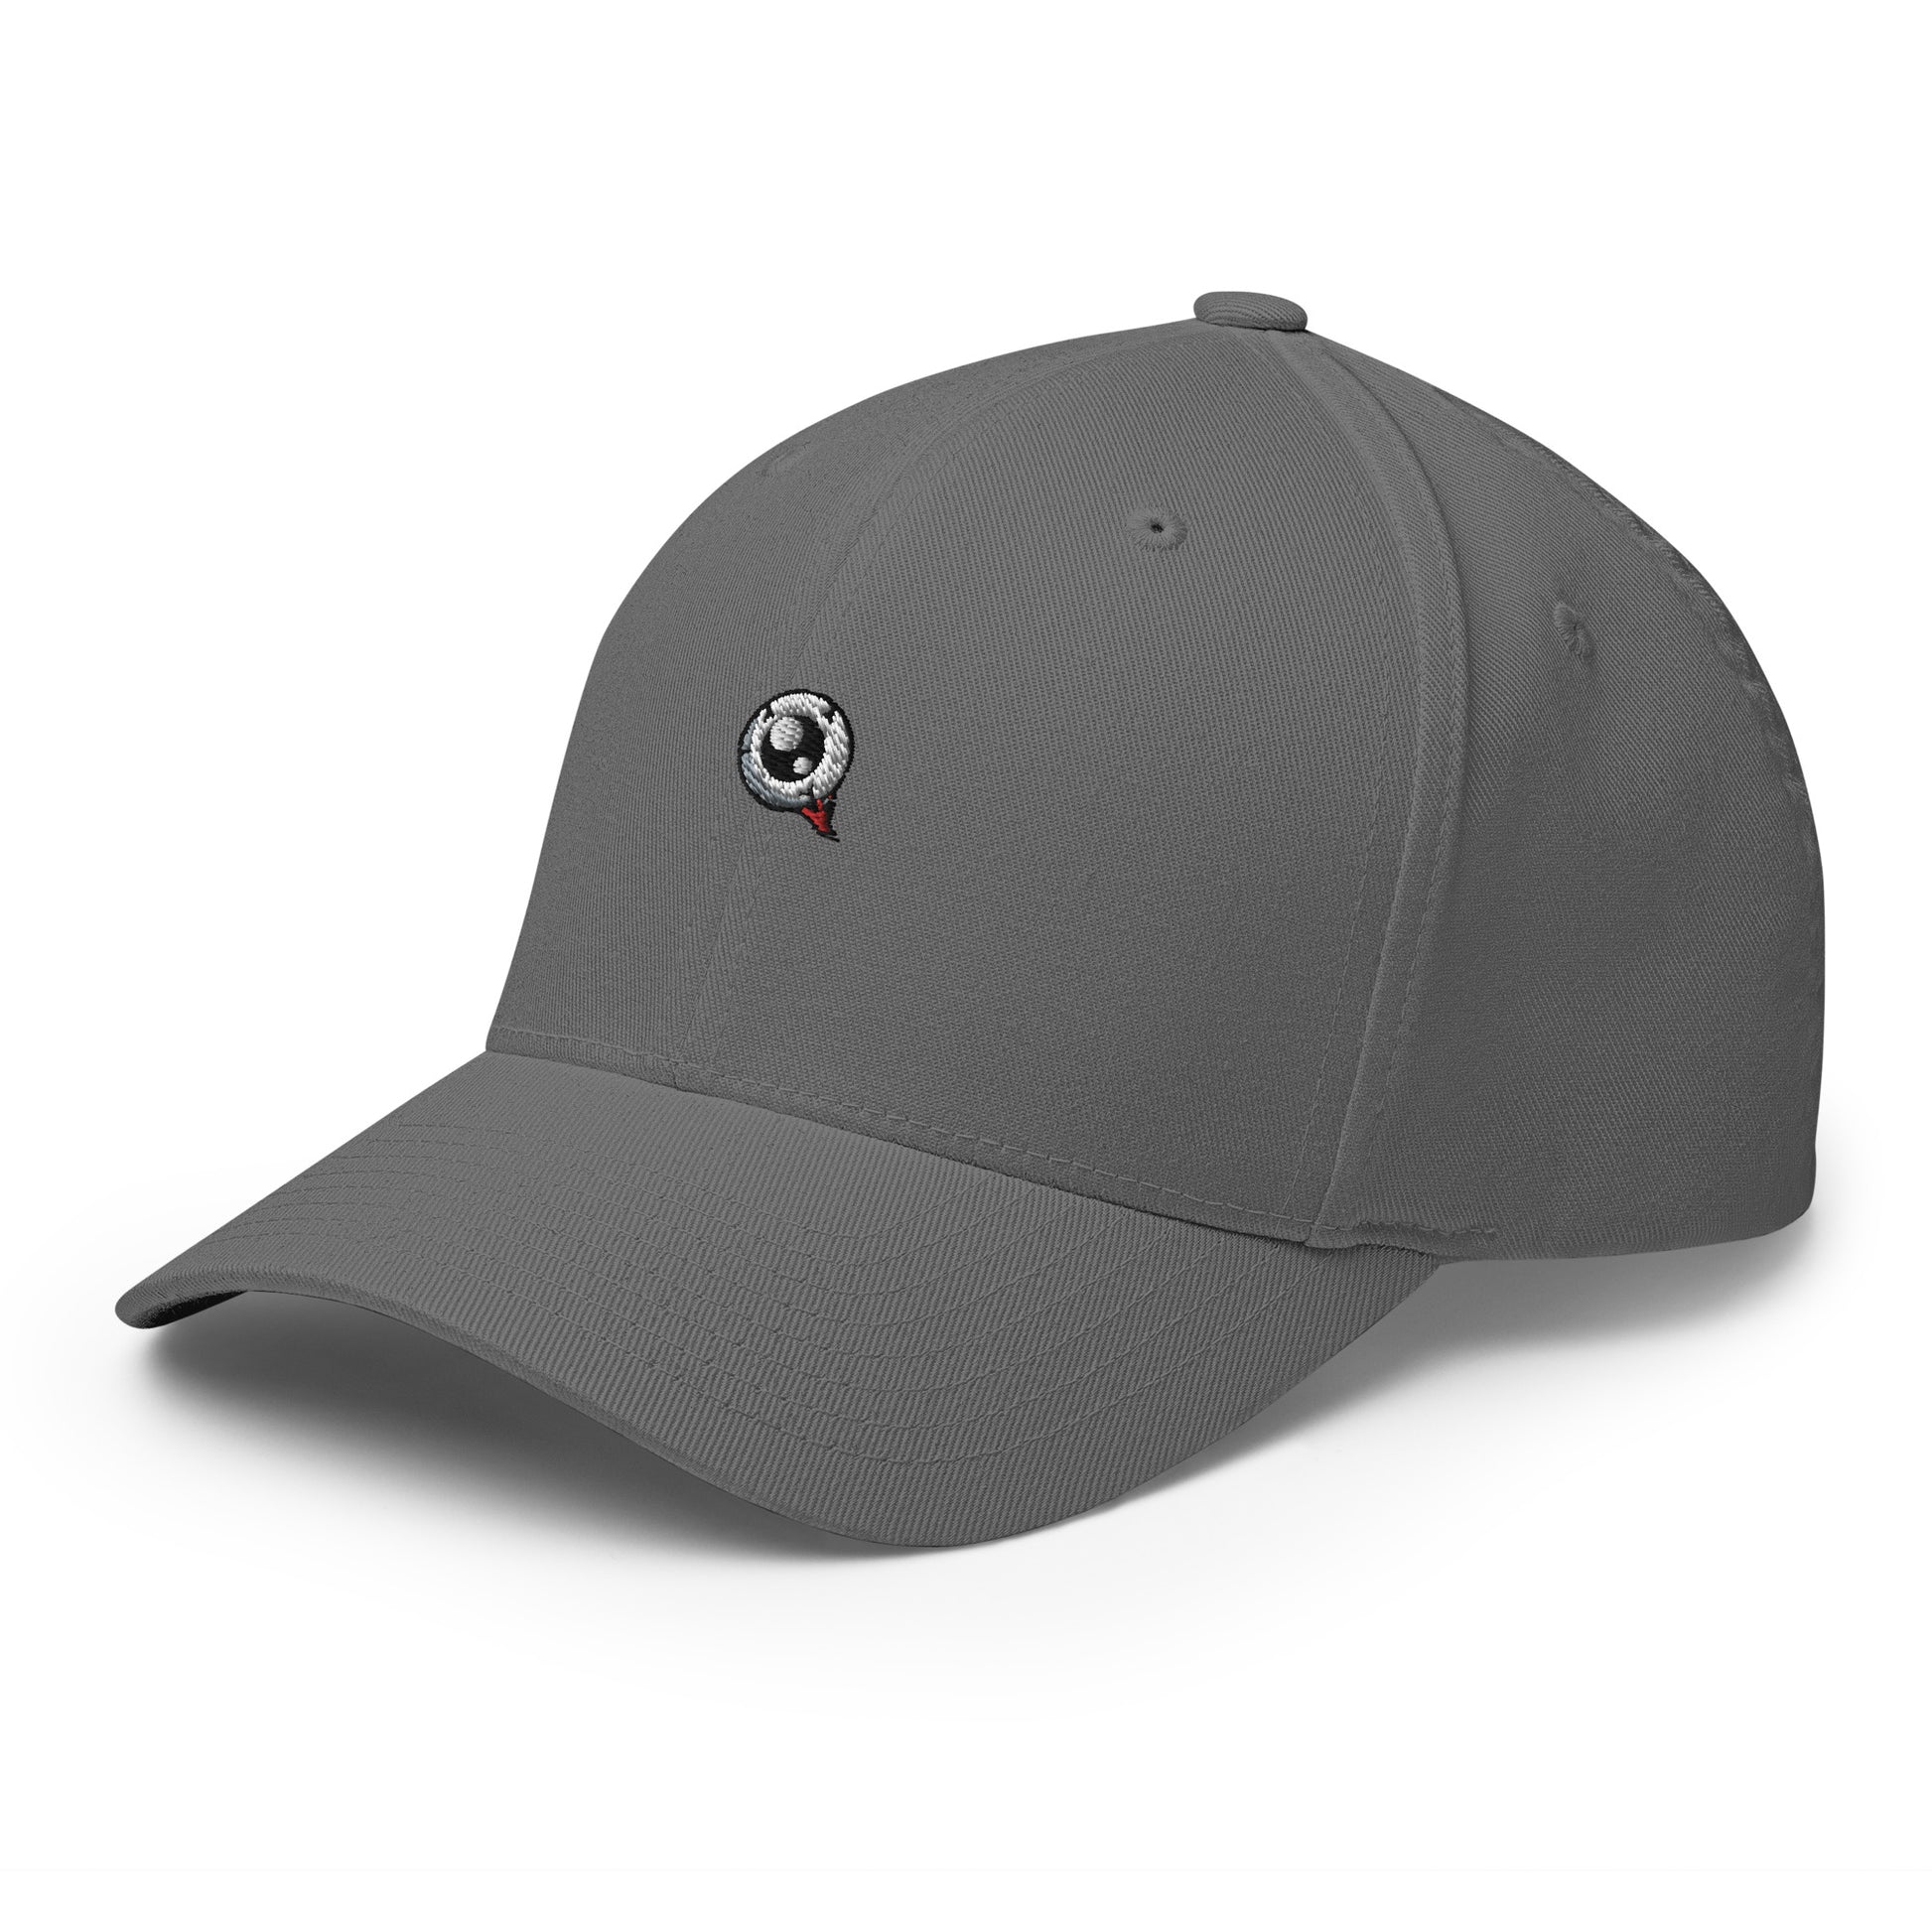 cap-from-the-front-with-eye-symbol